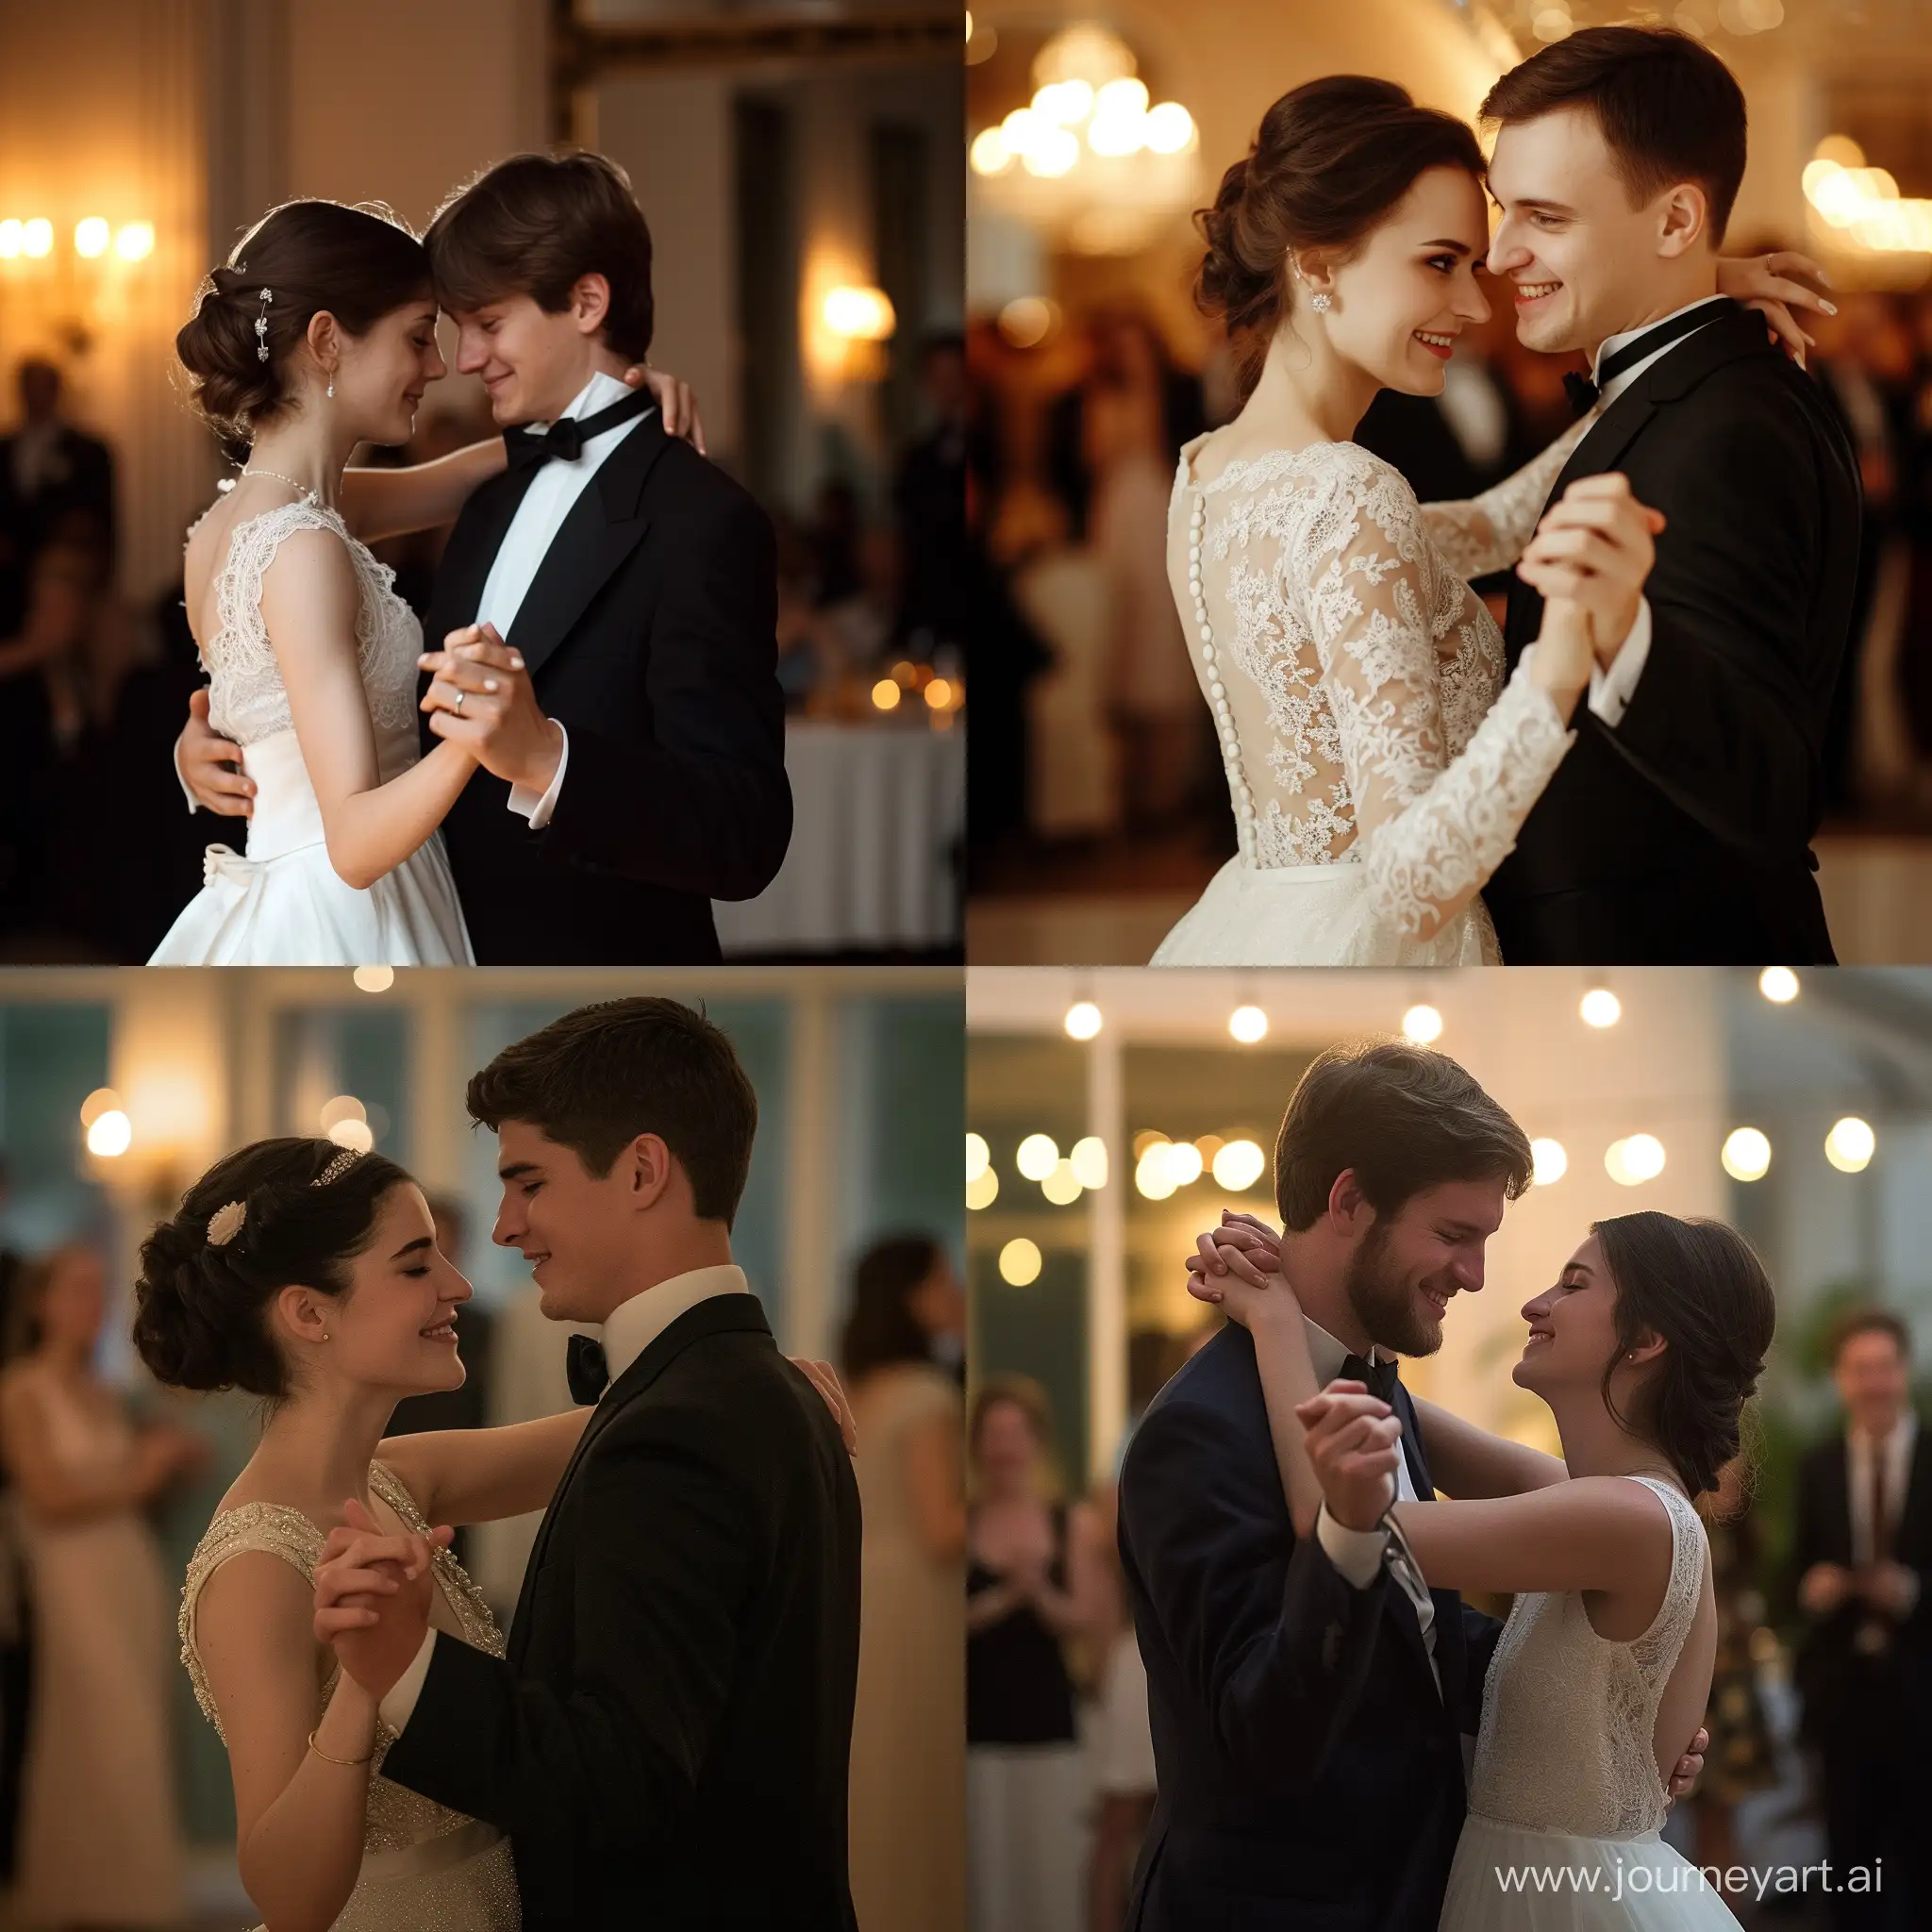 Young-Couples-First-Dance-in-Romantic-Ambiance